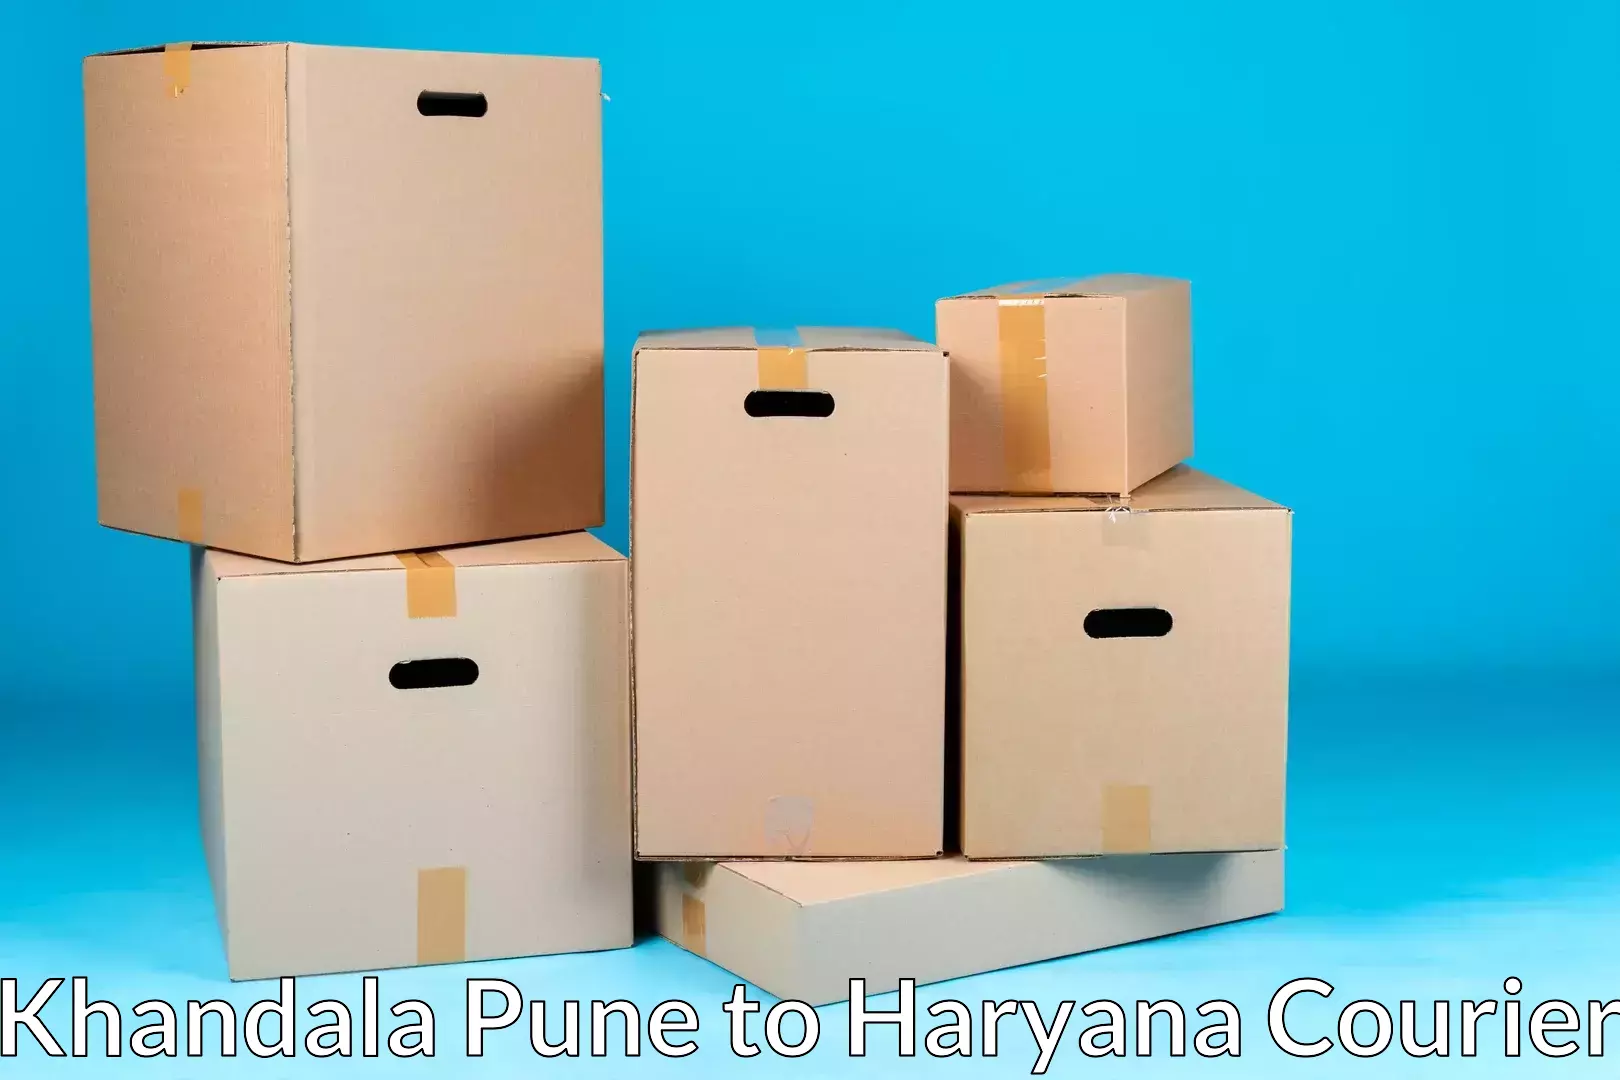 Professional moving assistance in Khandala Pune to Haryana